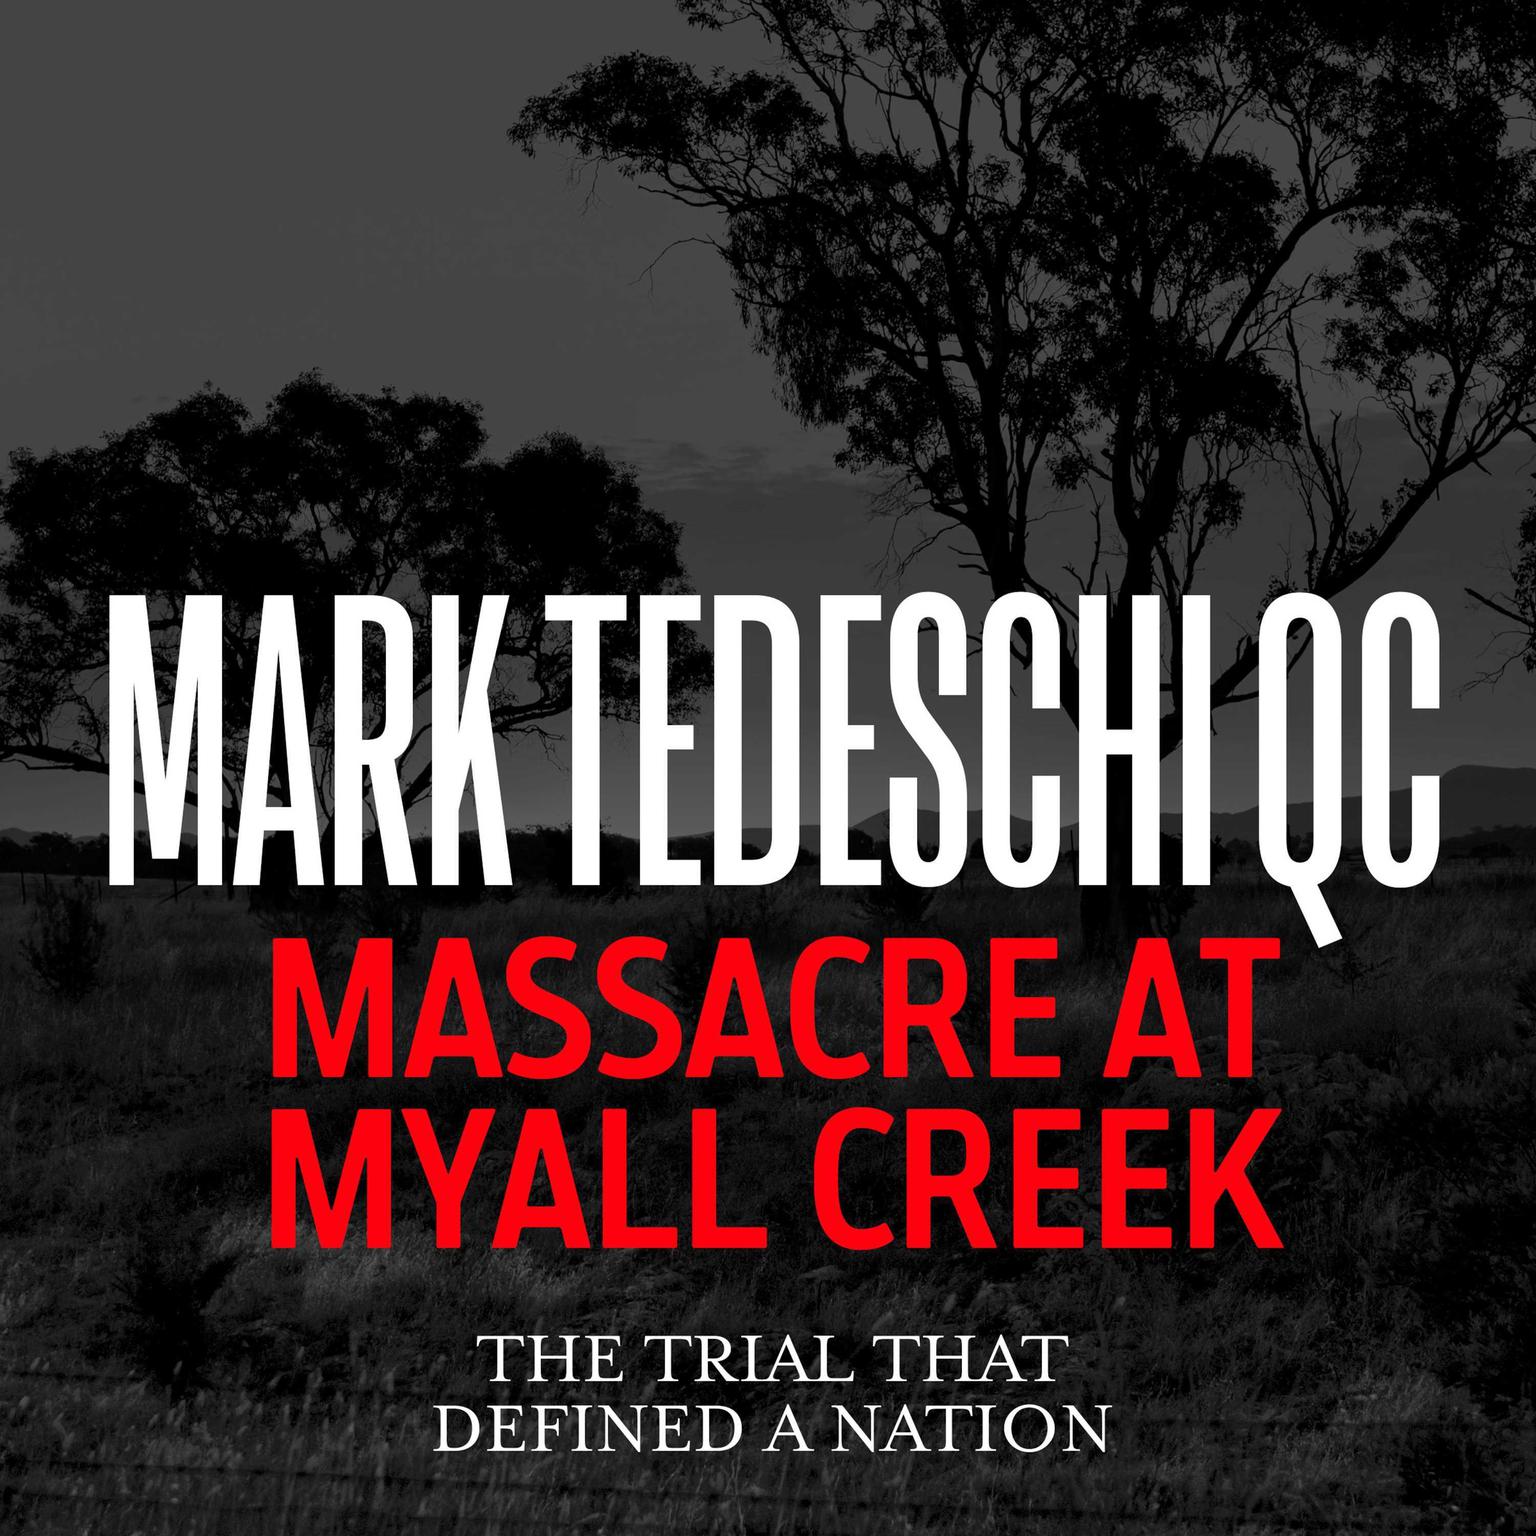 Massacre at Myall Creek: The trial that defined a nation Audiobook, by Mark Tedeschi